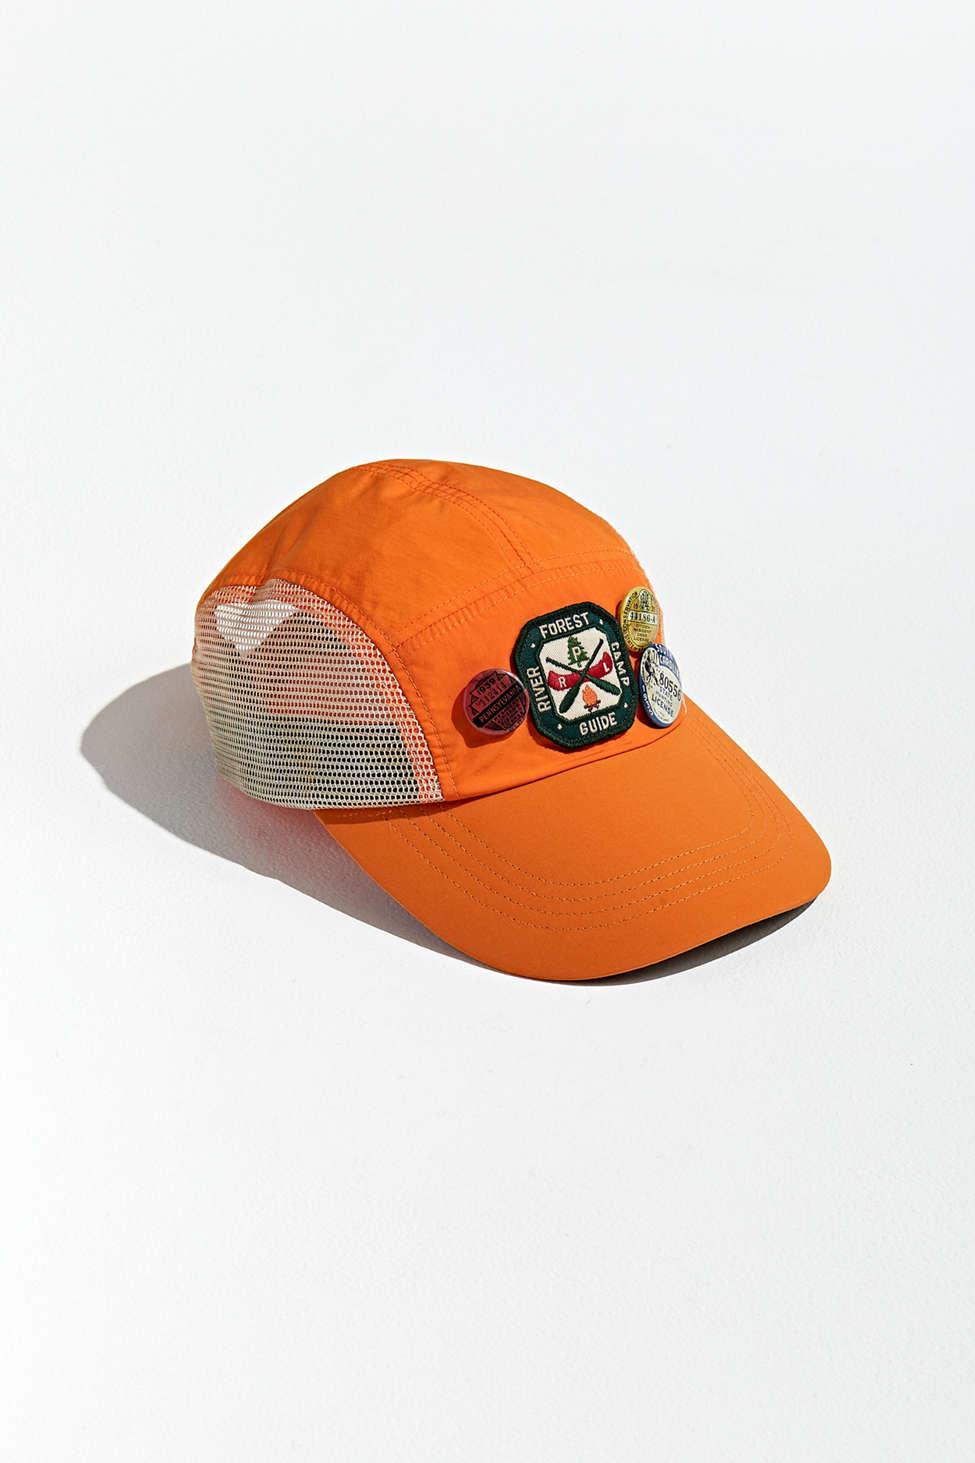 Polo Ralph Lauren Forest Guide 5-panel Fishing Hat in Orange for